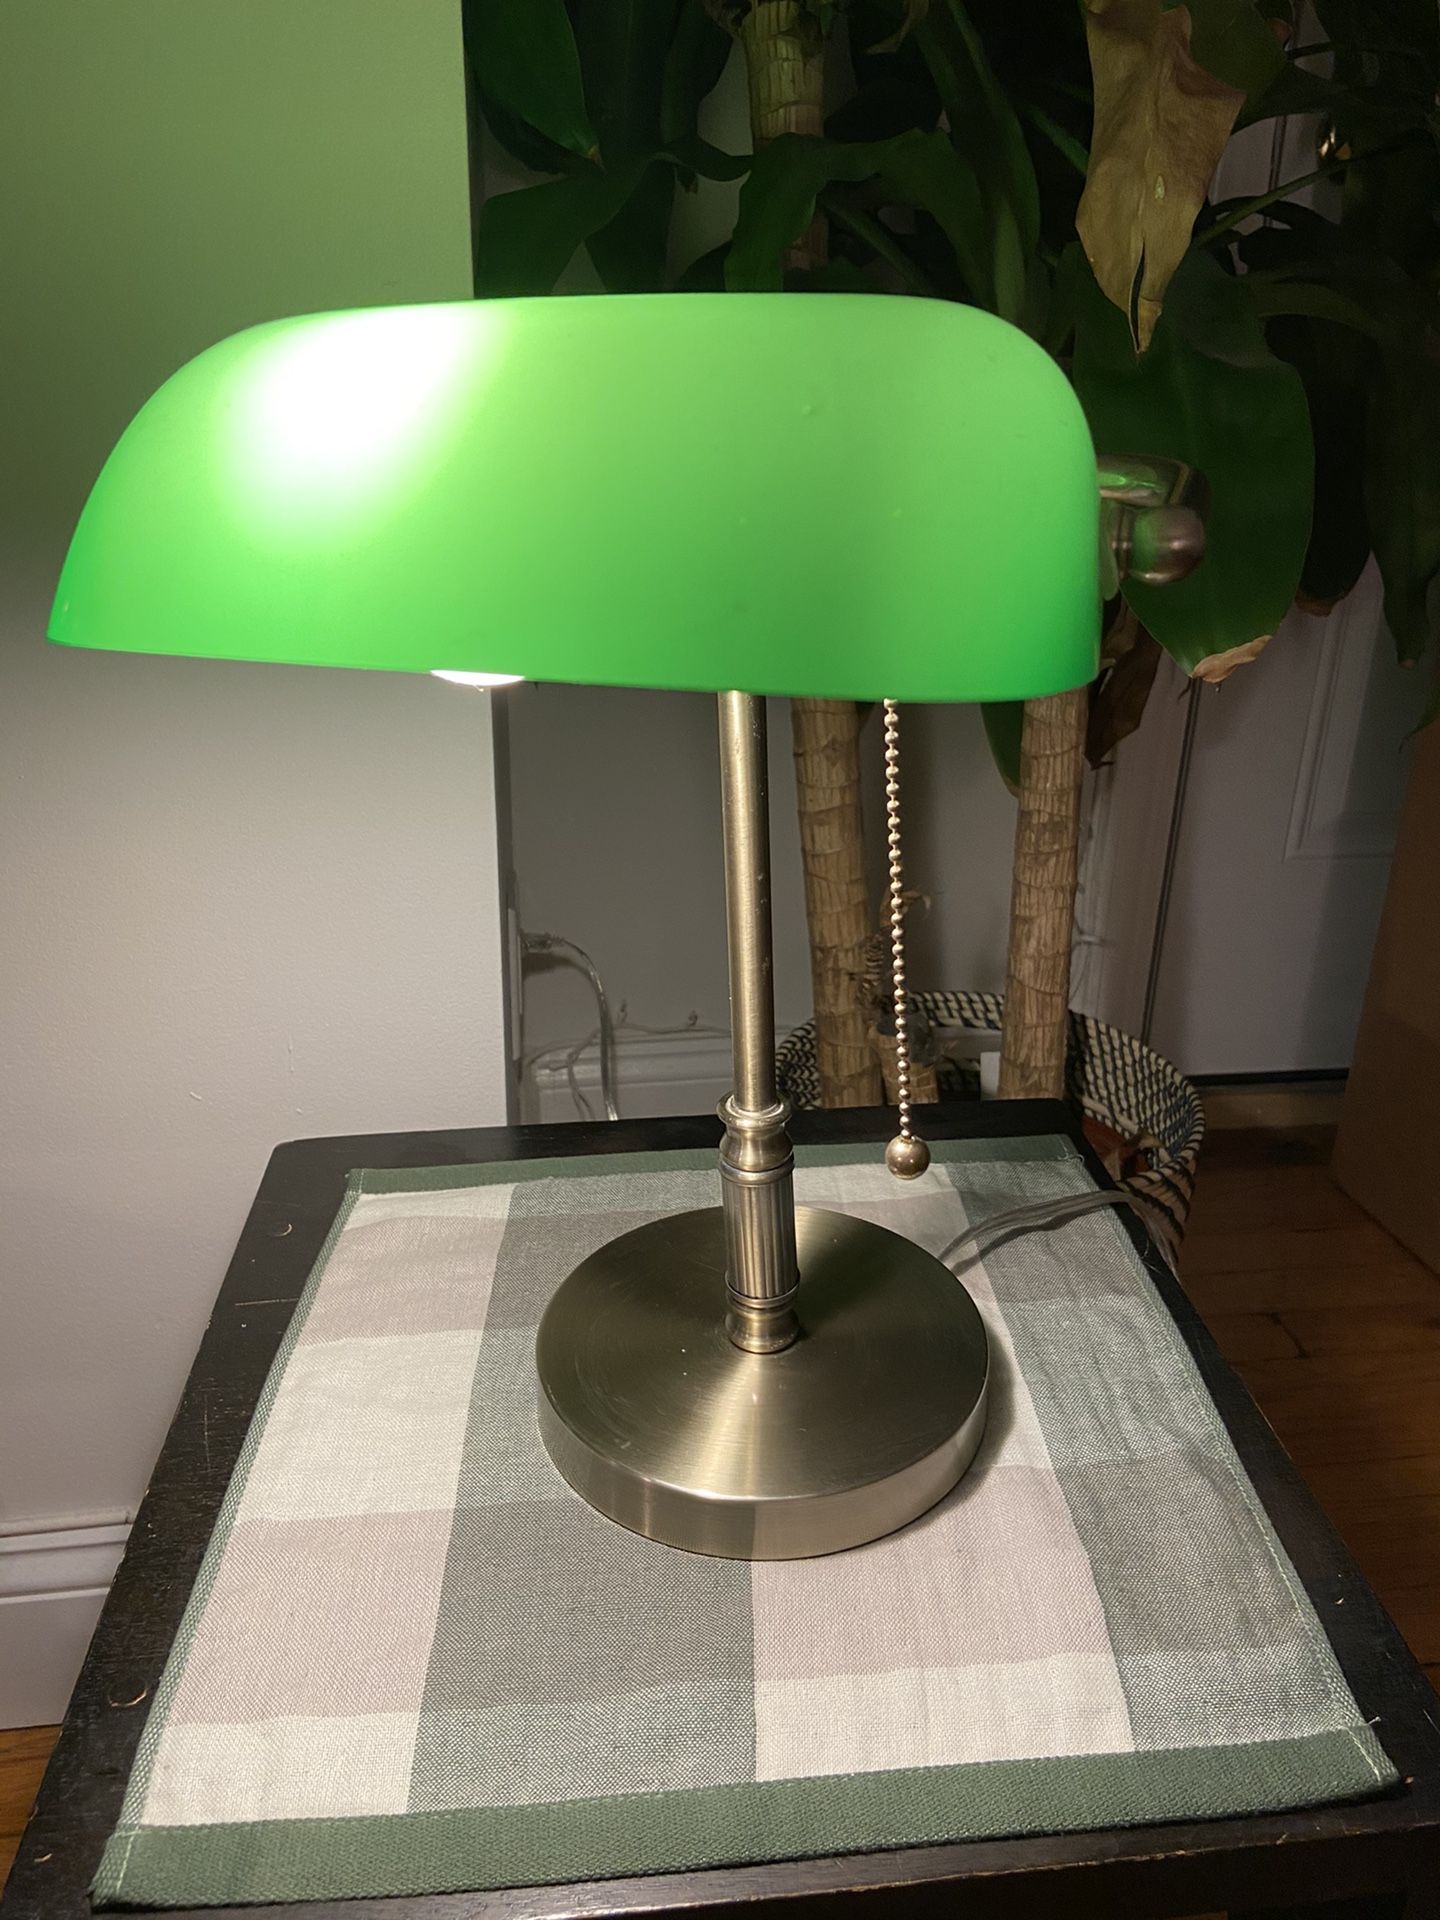 Traditional Banker’s Desk Lamp, Brass Base with Green Shade, 14” High